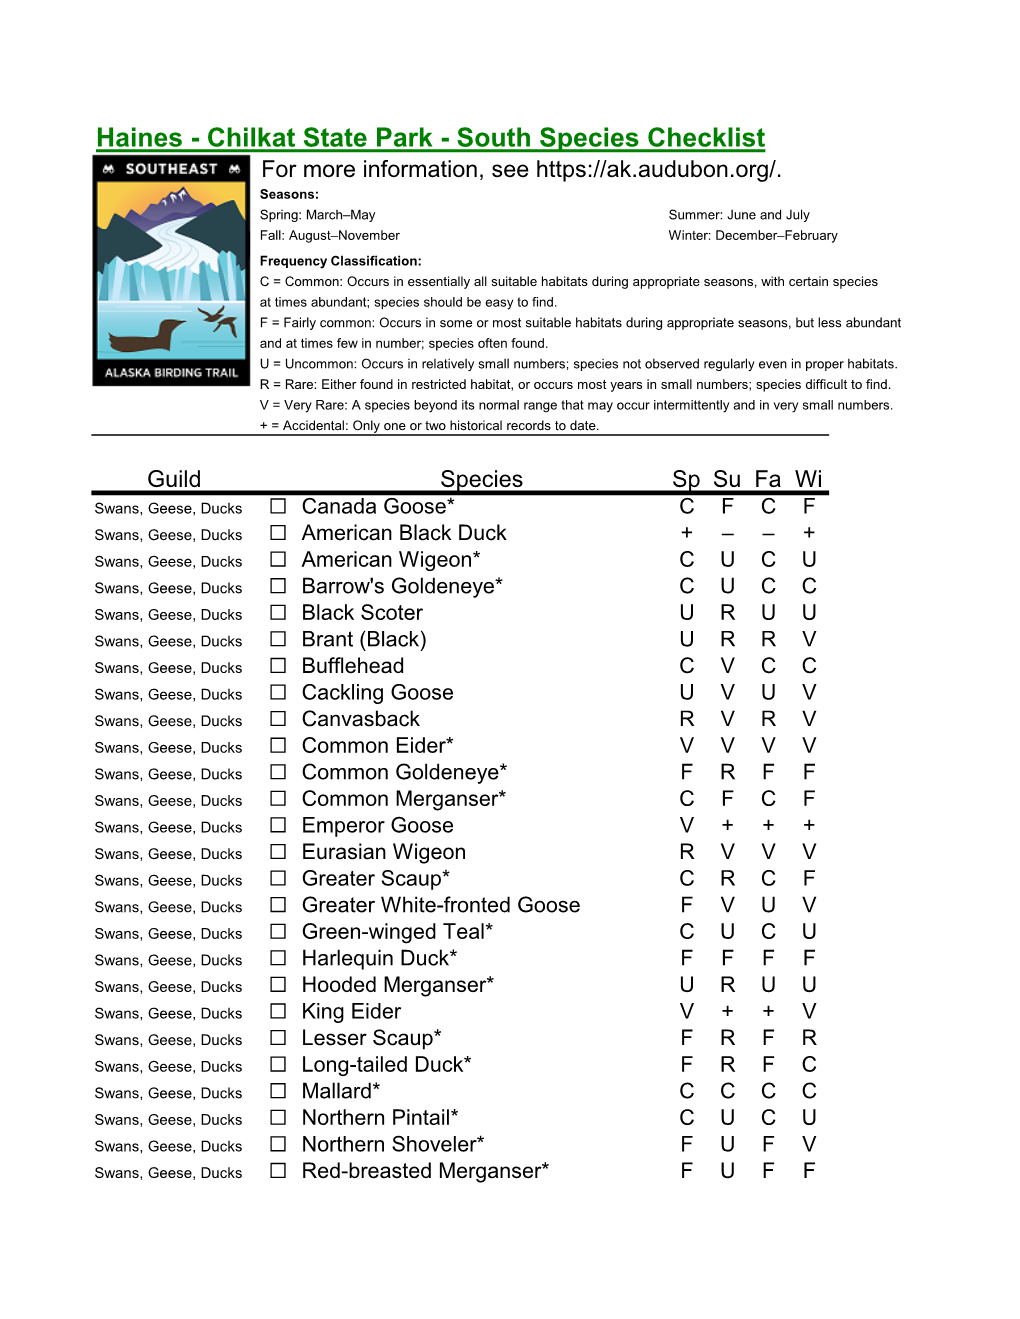 Chilkat State Park - South Species Checklist for More Information, See